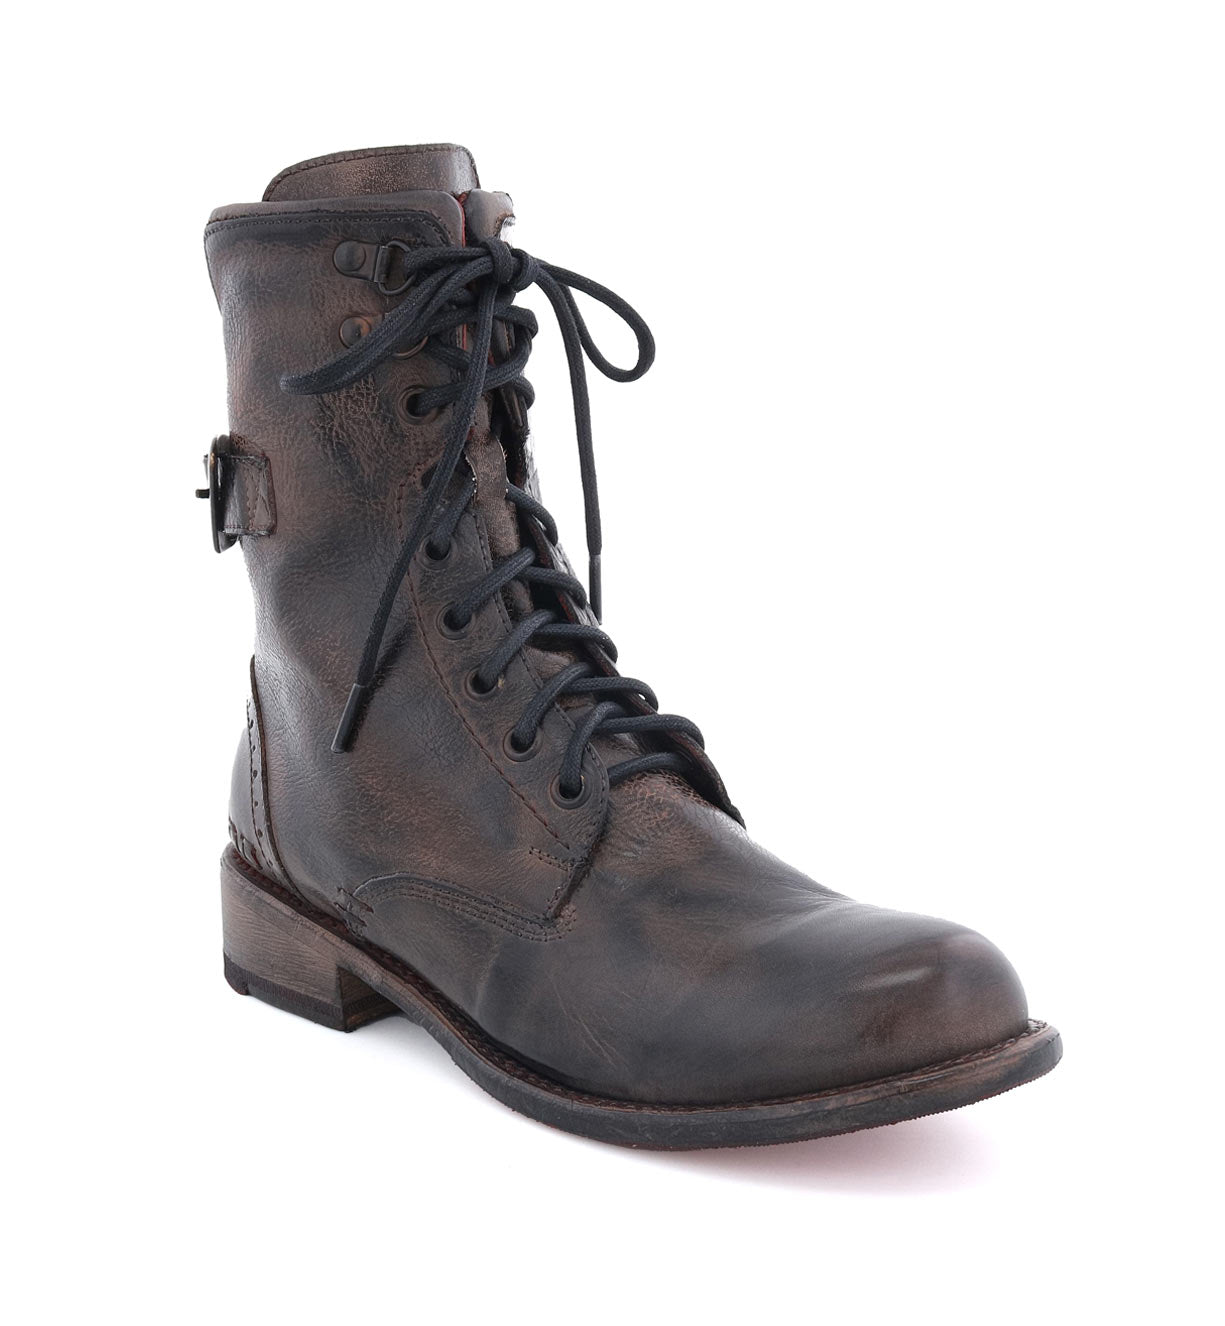 A pair of black leather Anne boots with laces from the brand Bed Stu.